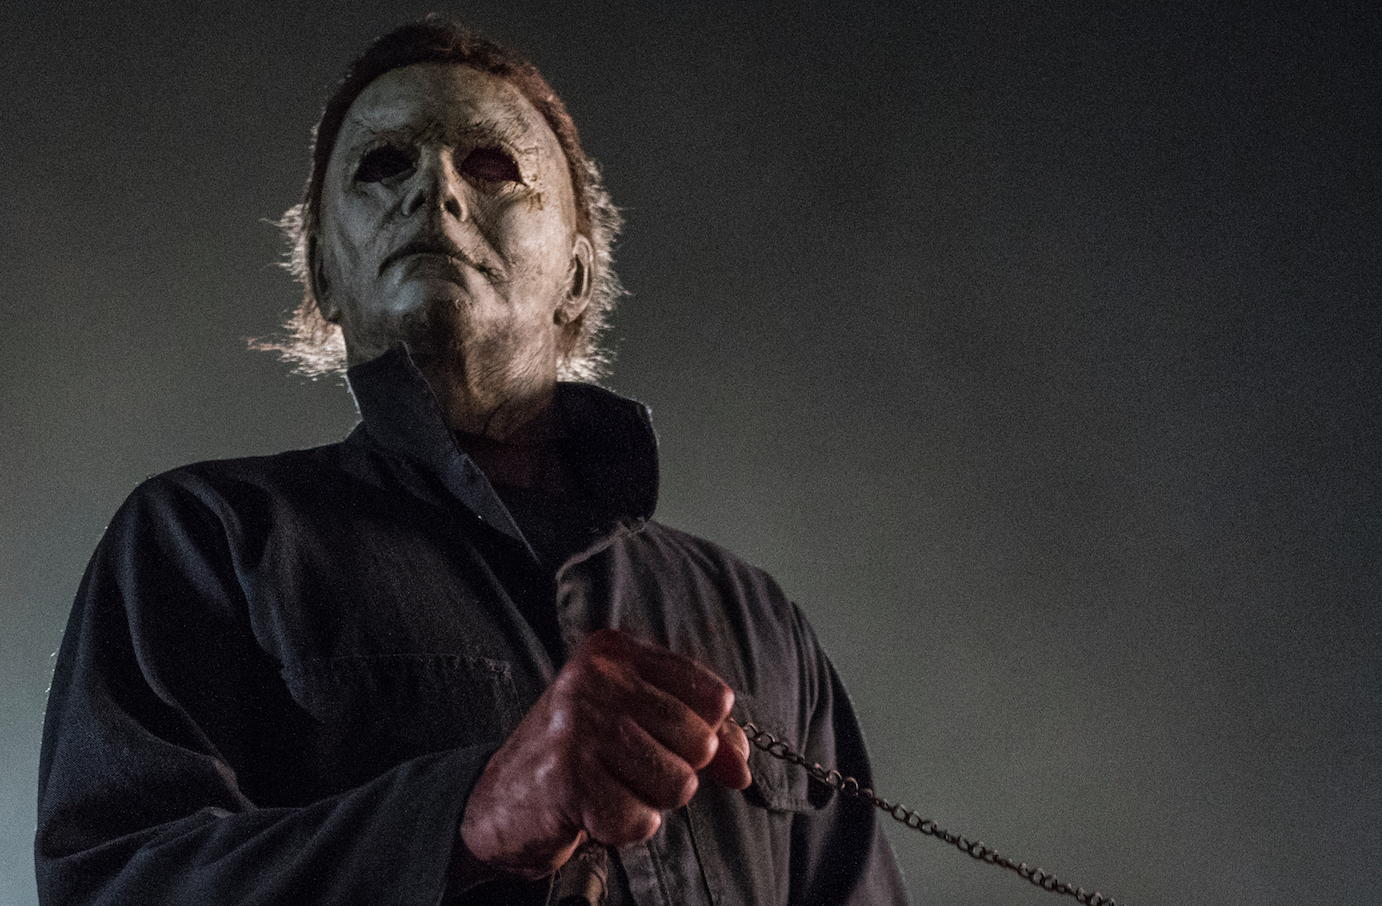 halloween 2 2020 sequel laurie and michael final showdown Review Halloween Delivers A Satisfying Laurie Vs Michael Showdown 40 Years In The Making Bloody Disgusting halloween 2 2020 sequel laurie and michael final showdown